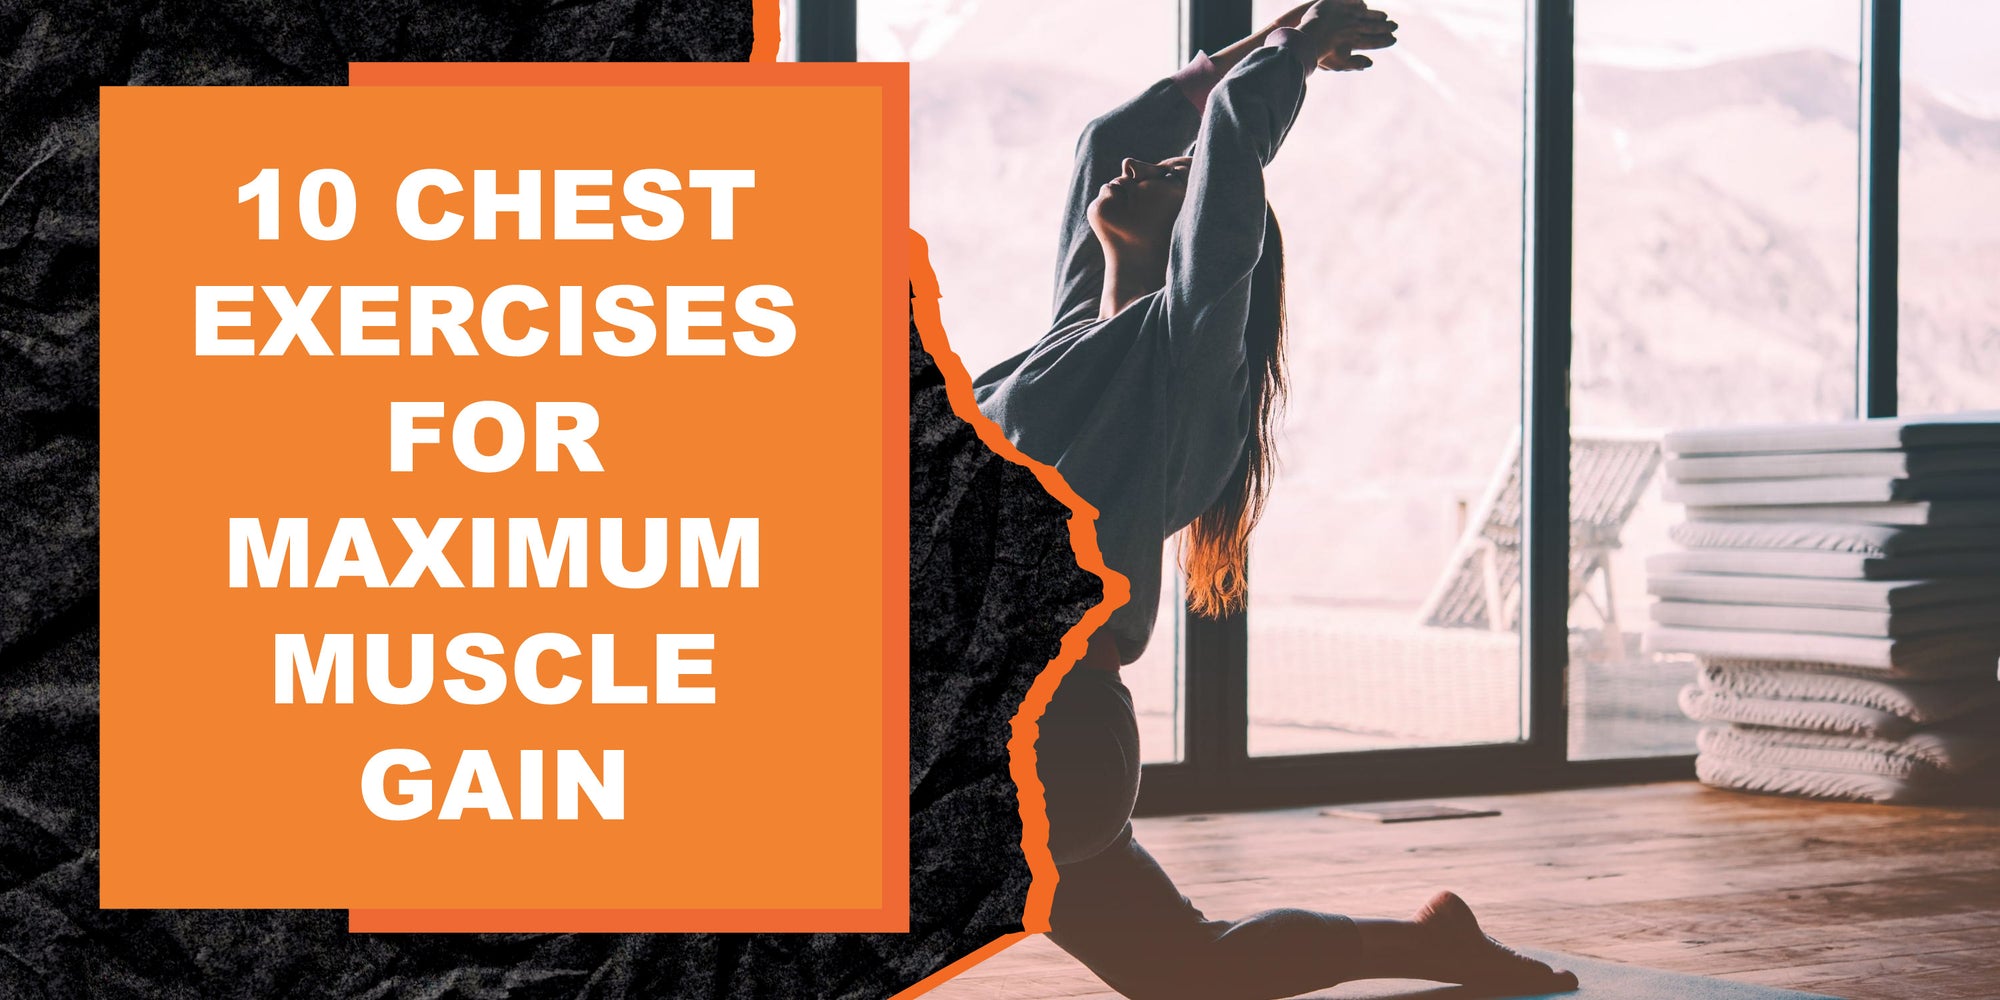 10 Chest Exercises for Maximum Muscle Gain